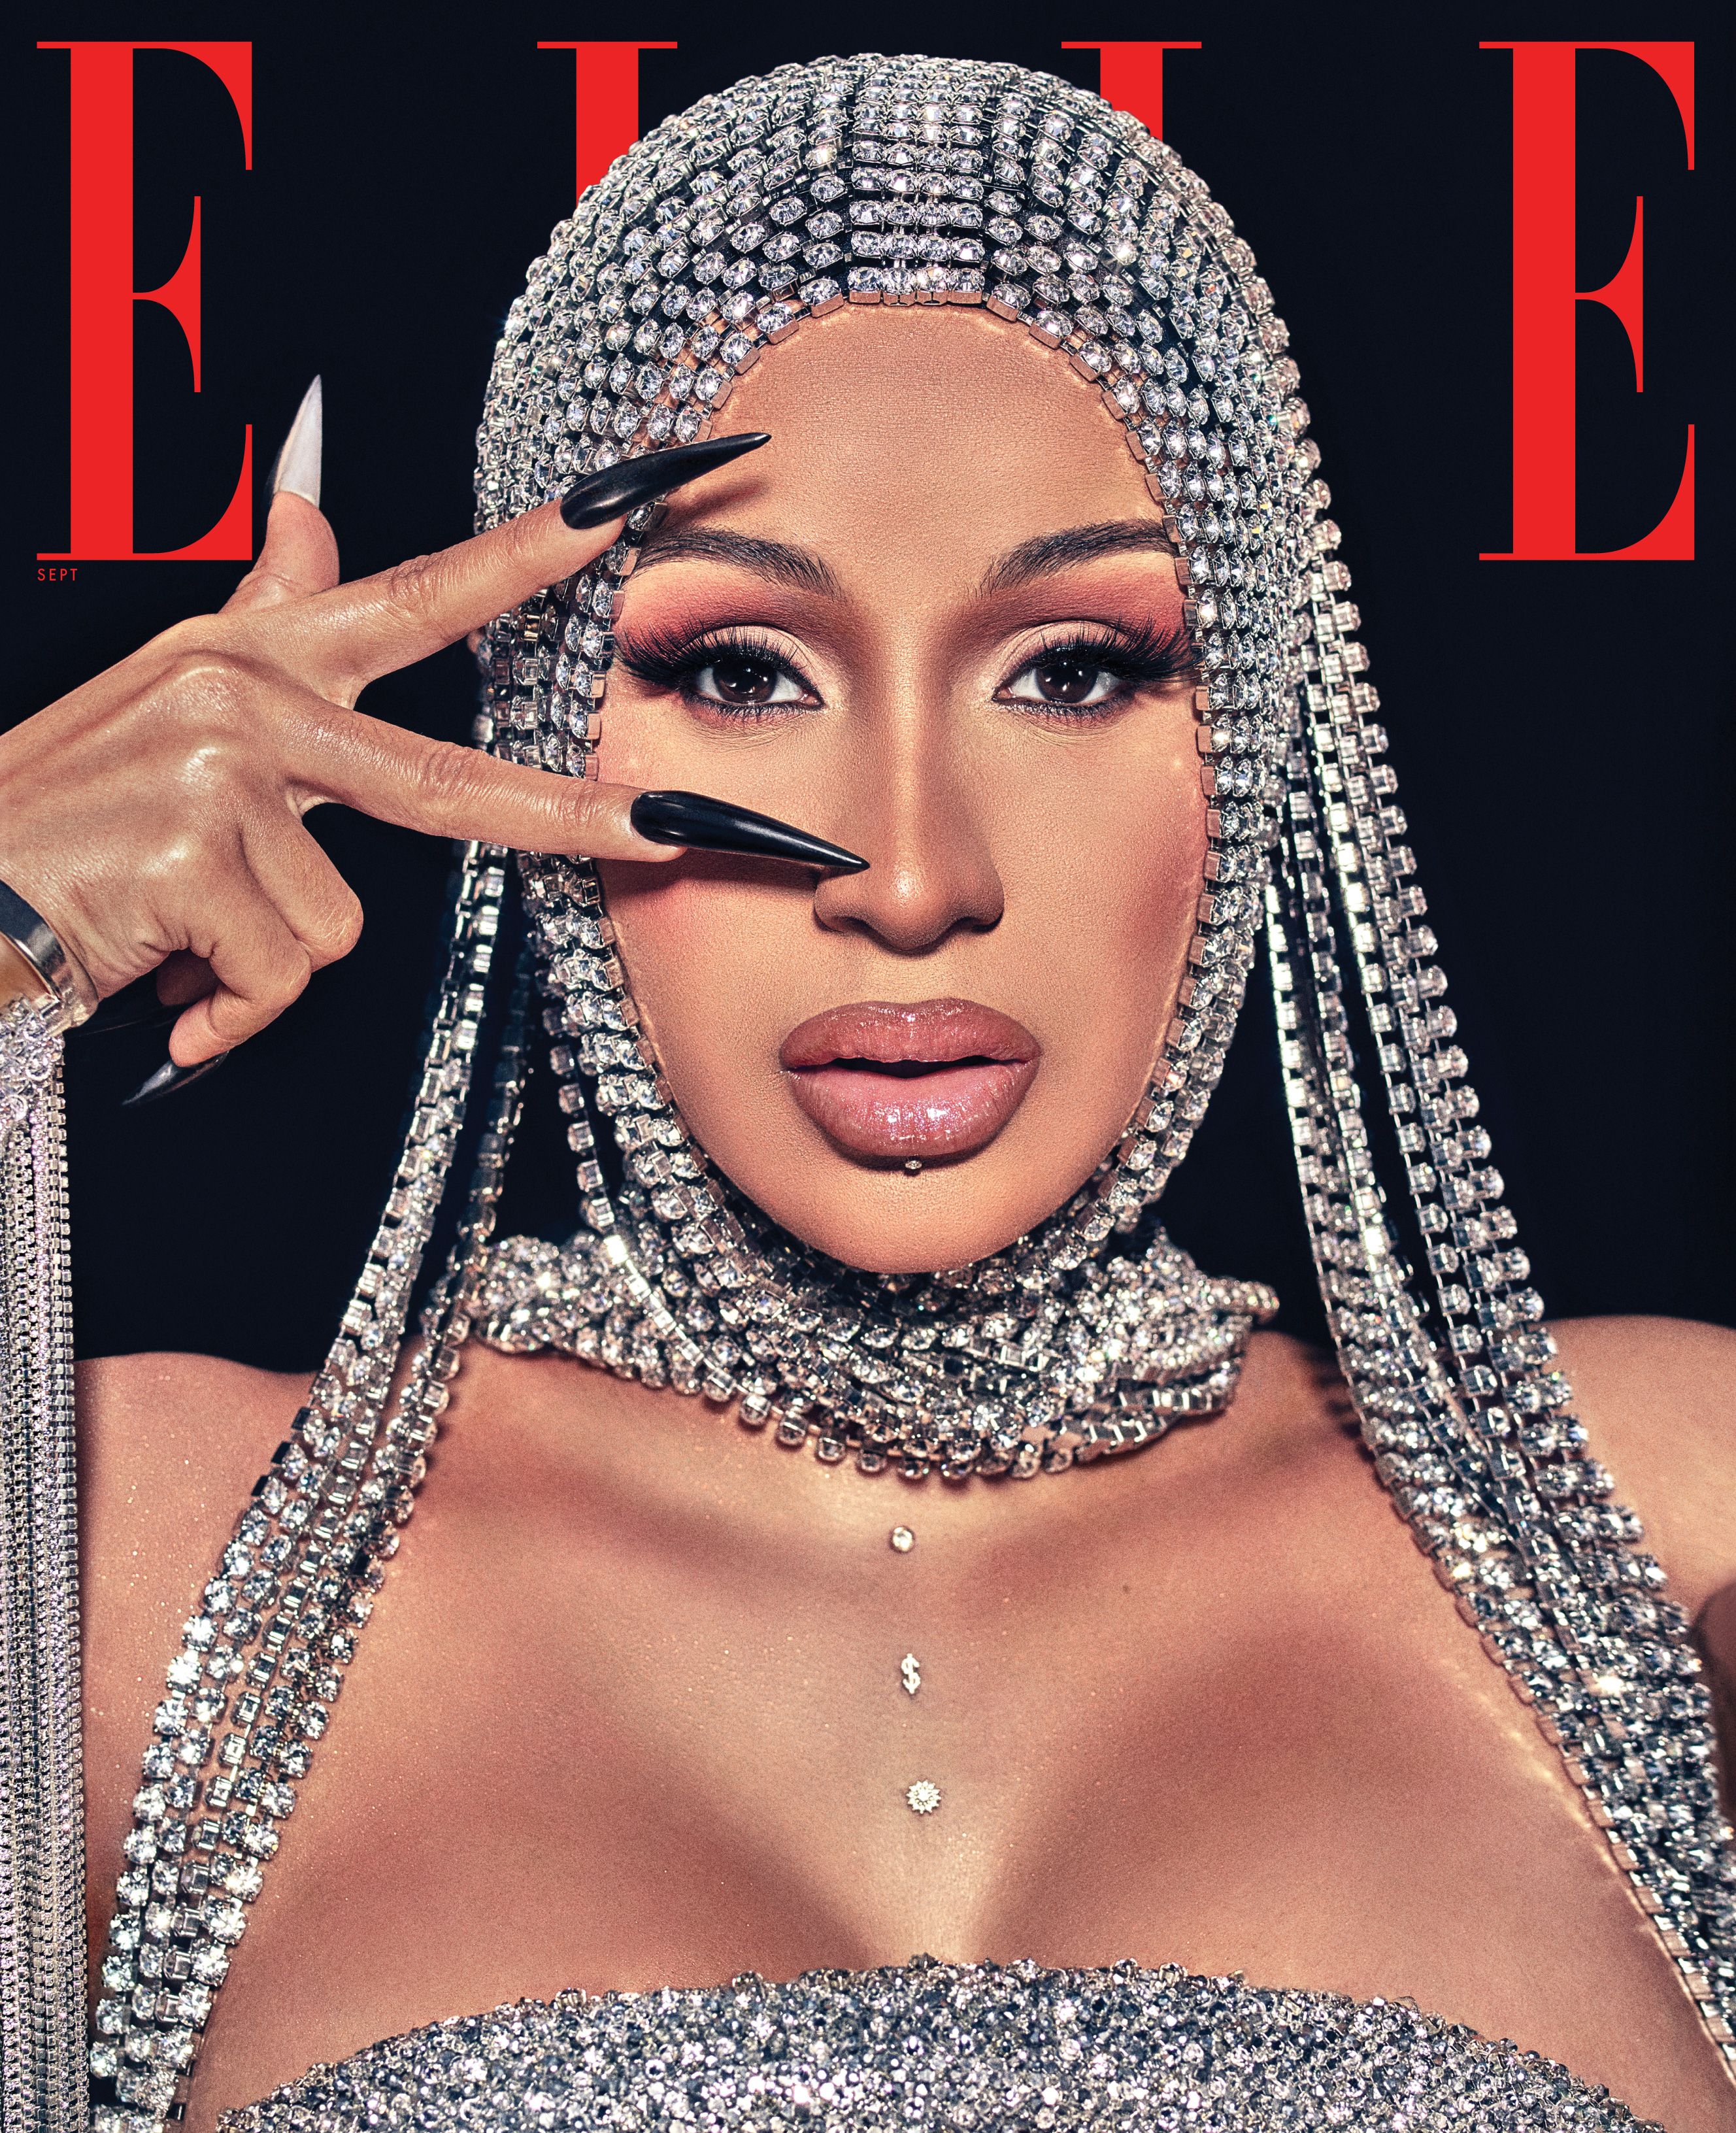 Cardi B on Her New Music, Marriage to Offset, and Fighting for Breonna  Taylor